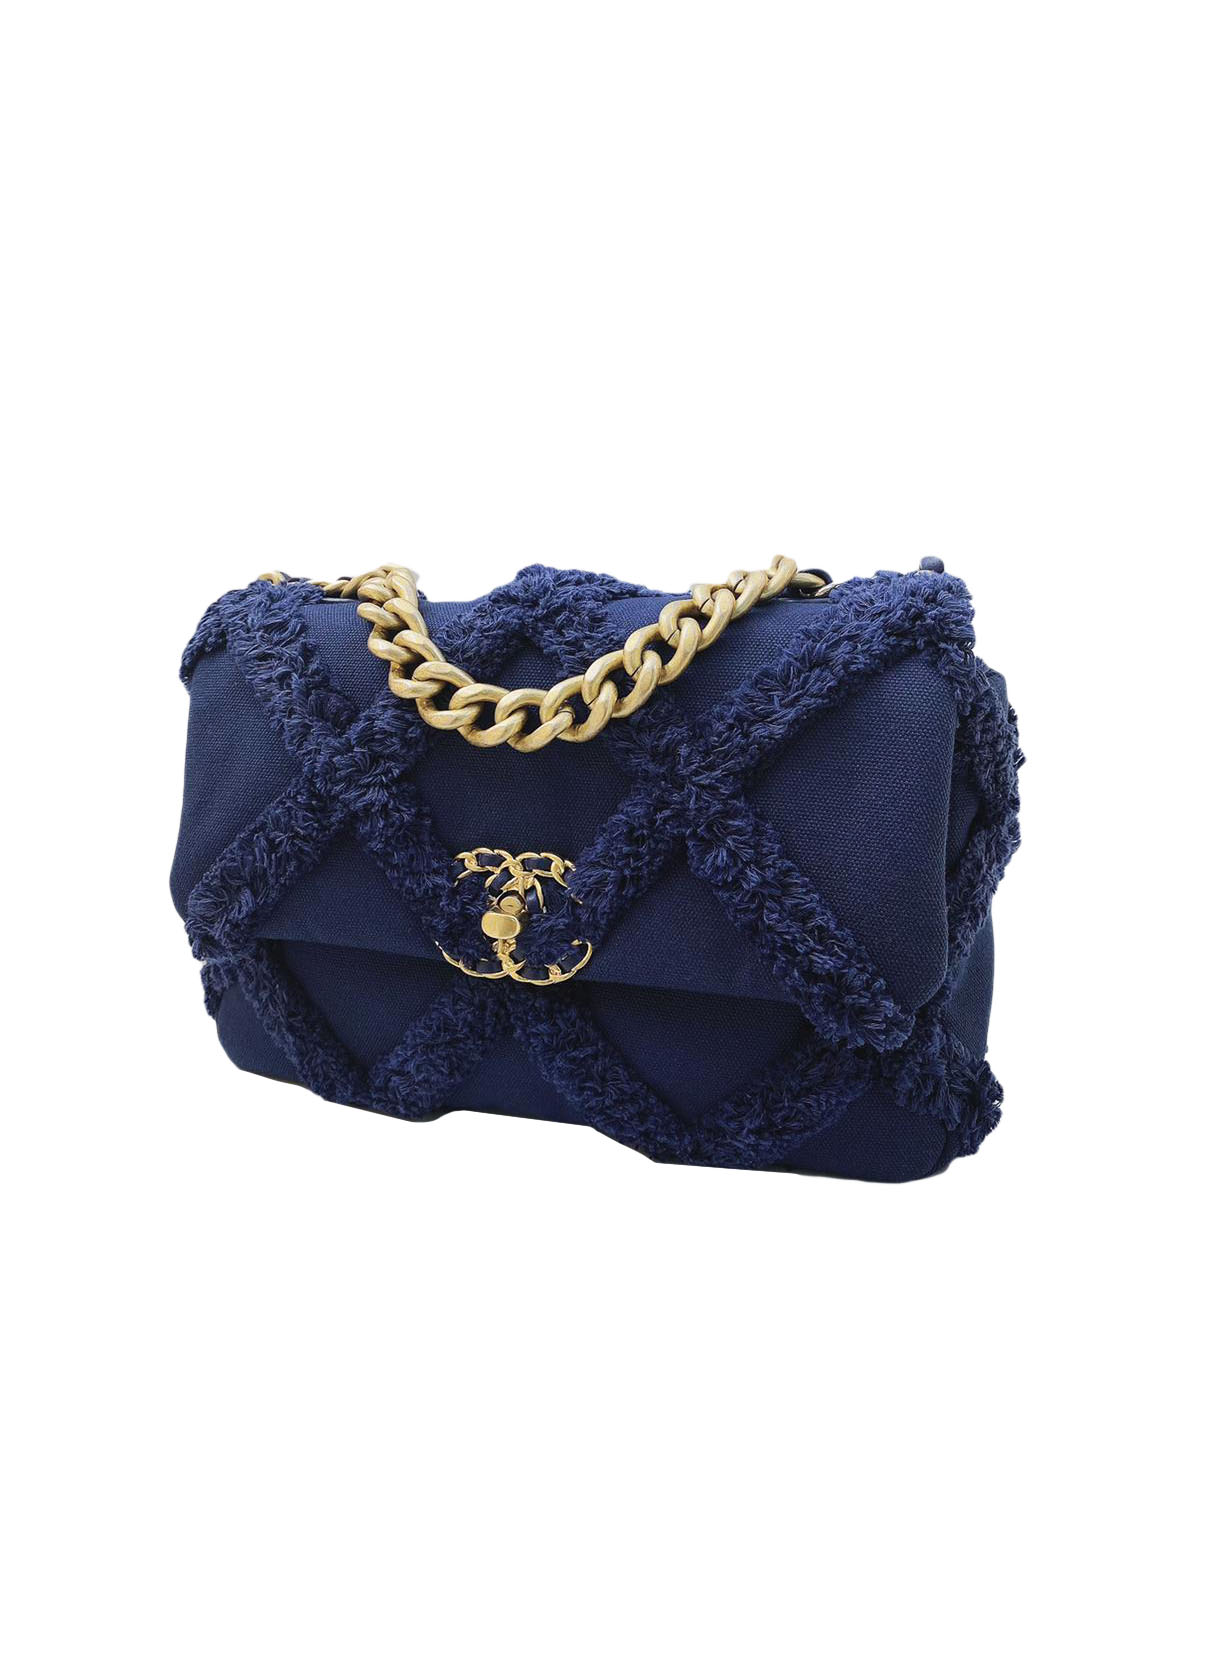 BLUE COTTON CANVAS QUILTED MEDIUM CHANEL 19 FLAP BAG - styleforless